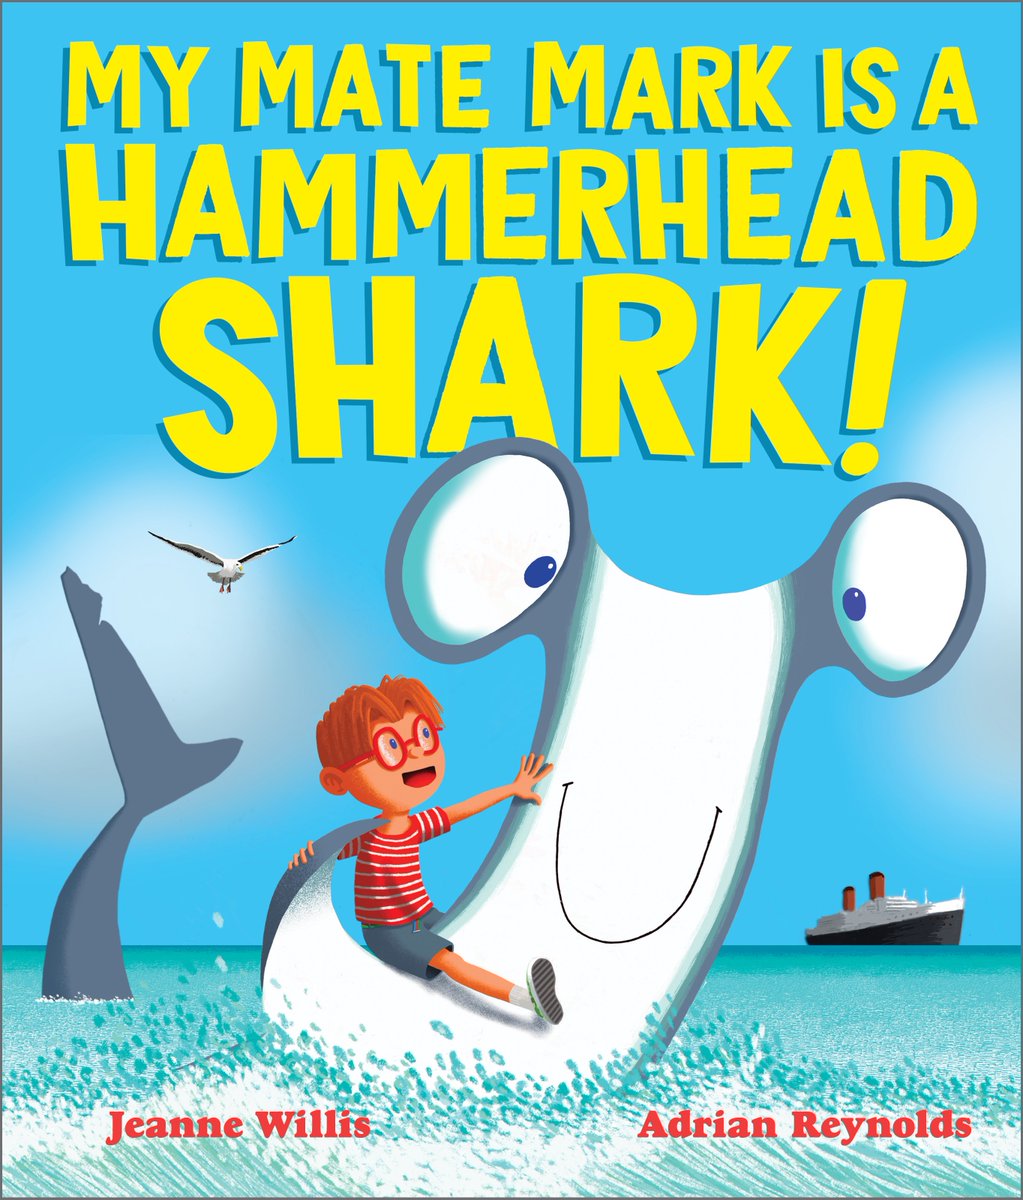 Mark doesn’t have it easy – unless he wears a disguise. But when a little boy befriends him, he can see something in Mark that everyone else can’t… could Mark be a harmless hero? MY MATE MARK IS A HAMMERHEAD SHARK is a hilarious picture book by Jeanne Willis & Adrian Reynolds